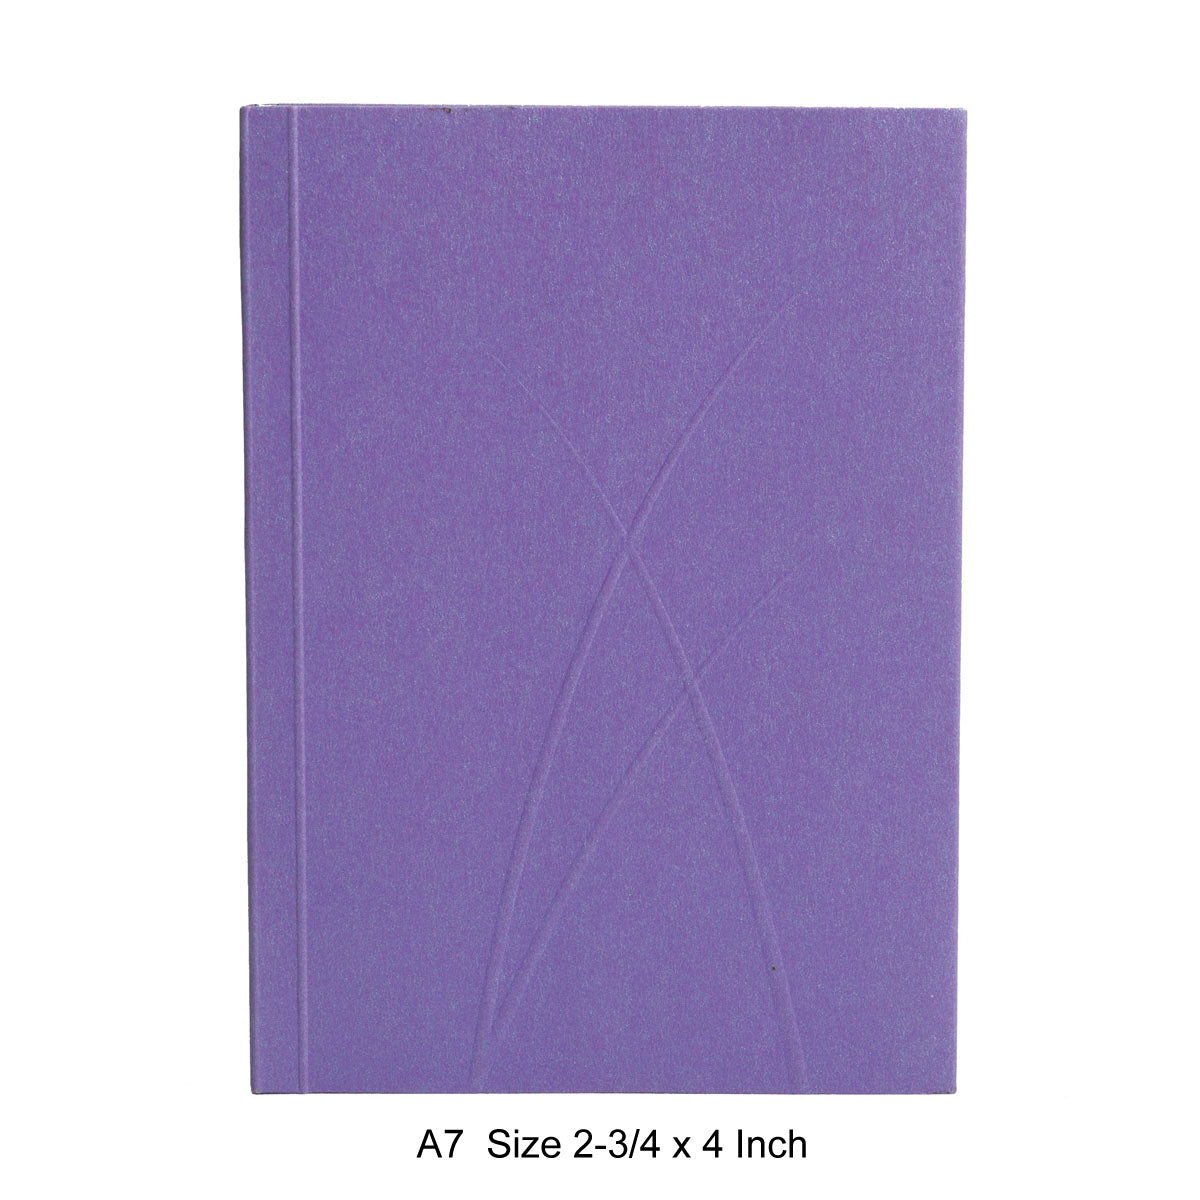 Paper-Oh Puro Notebook A7 Size